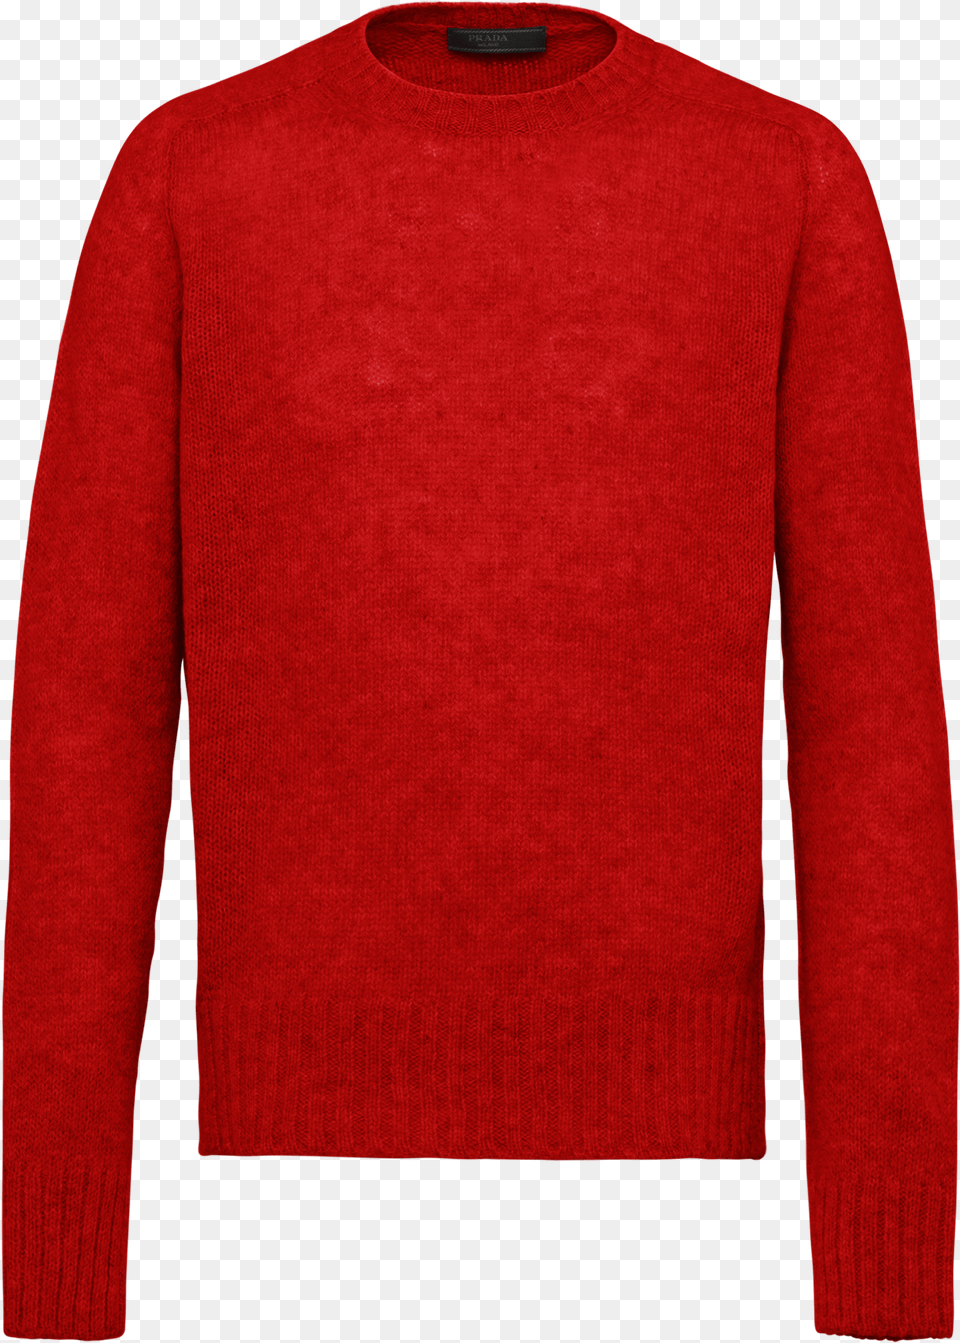 Red Long Sleeved T Shirt, Clothing, Knitwear, Sweater, Sweatshirt Png